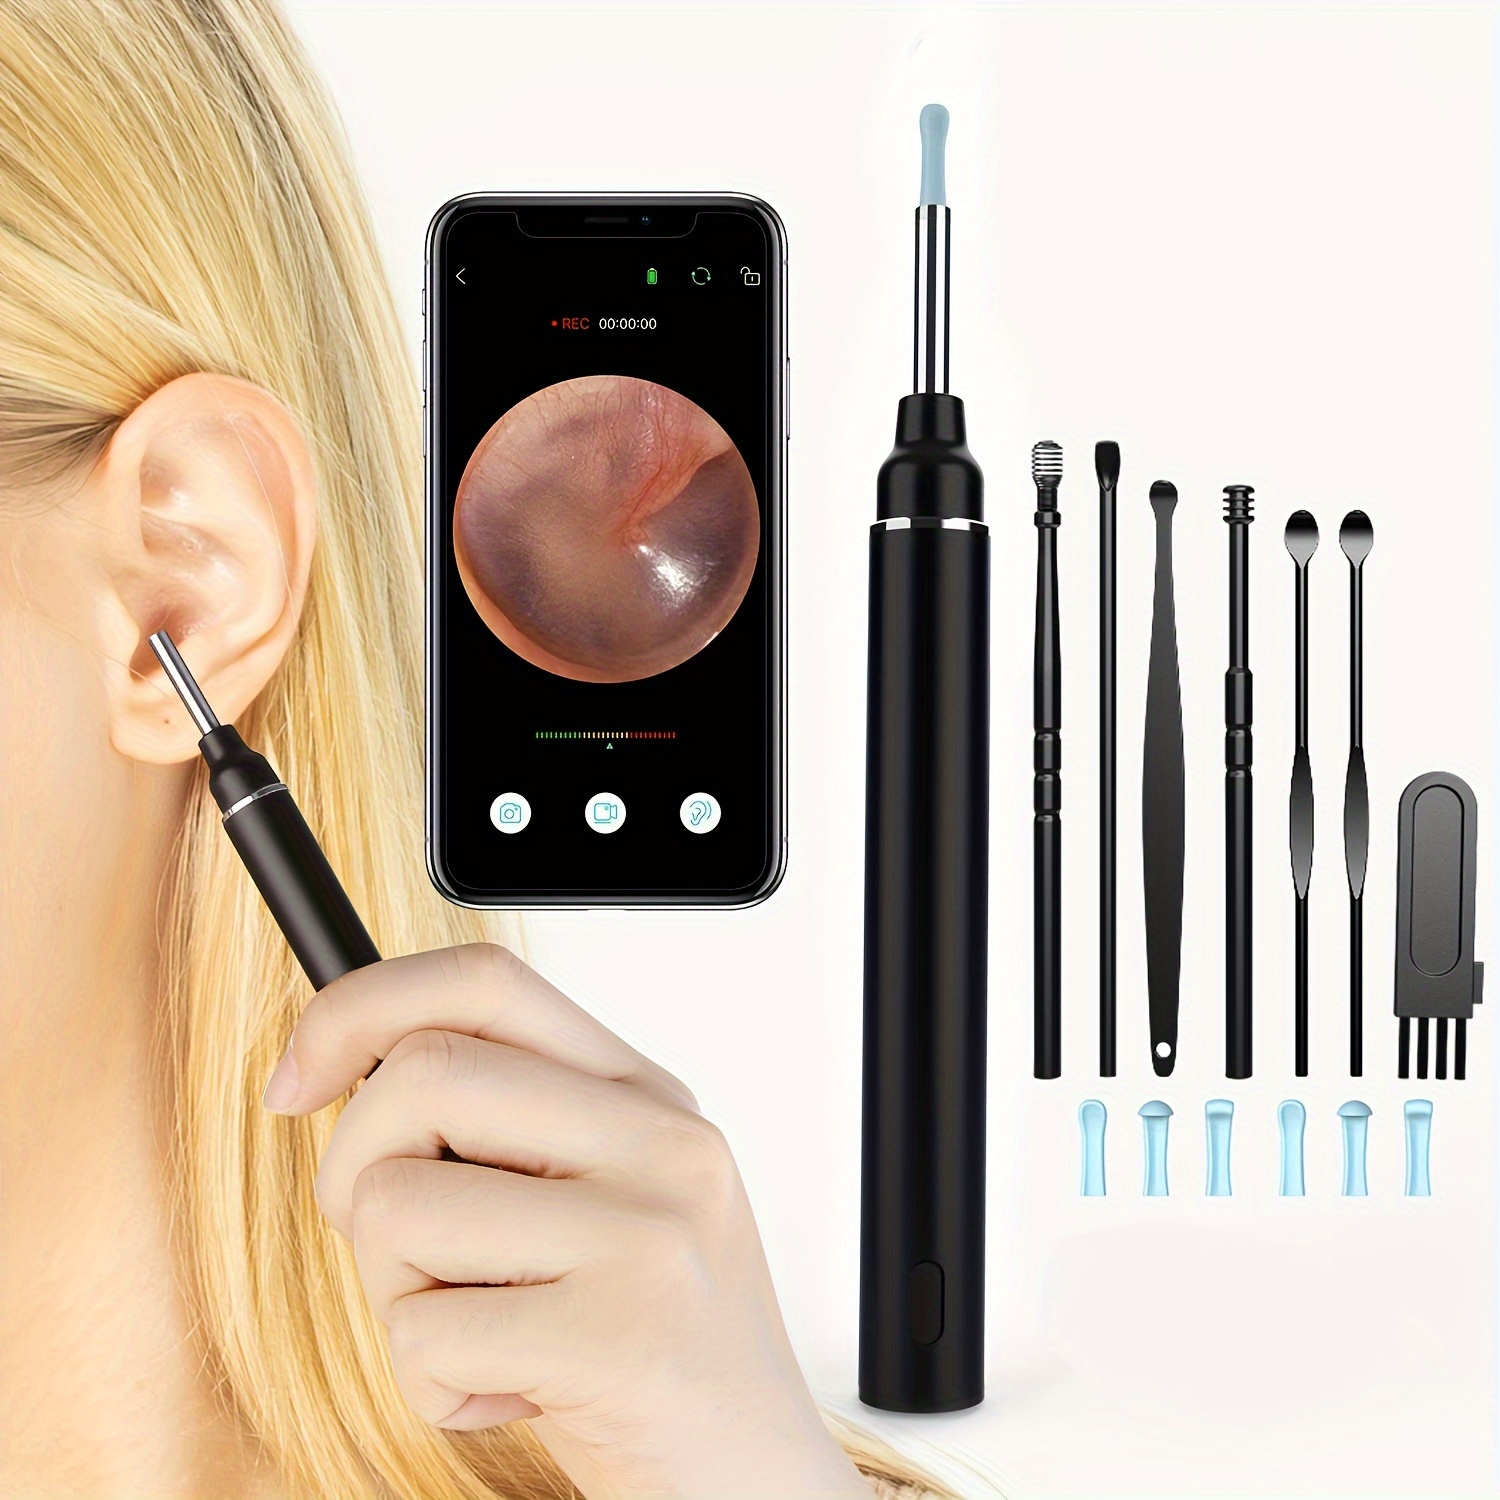 Endoscope for medical ear cleaning, device with mini camera